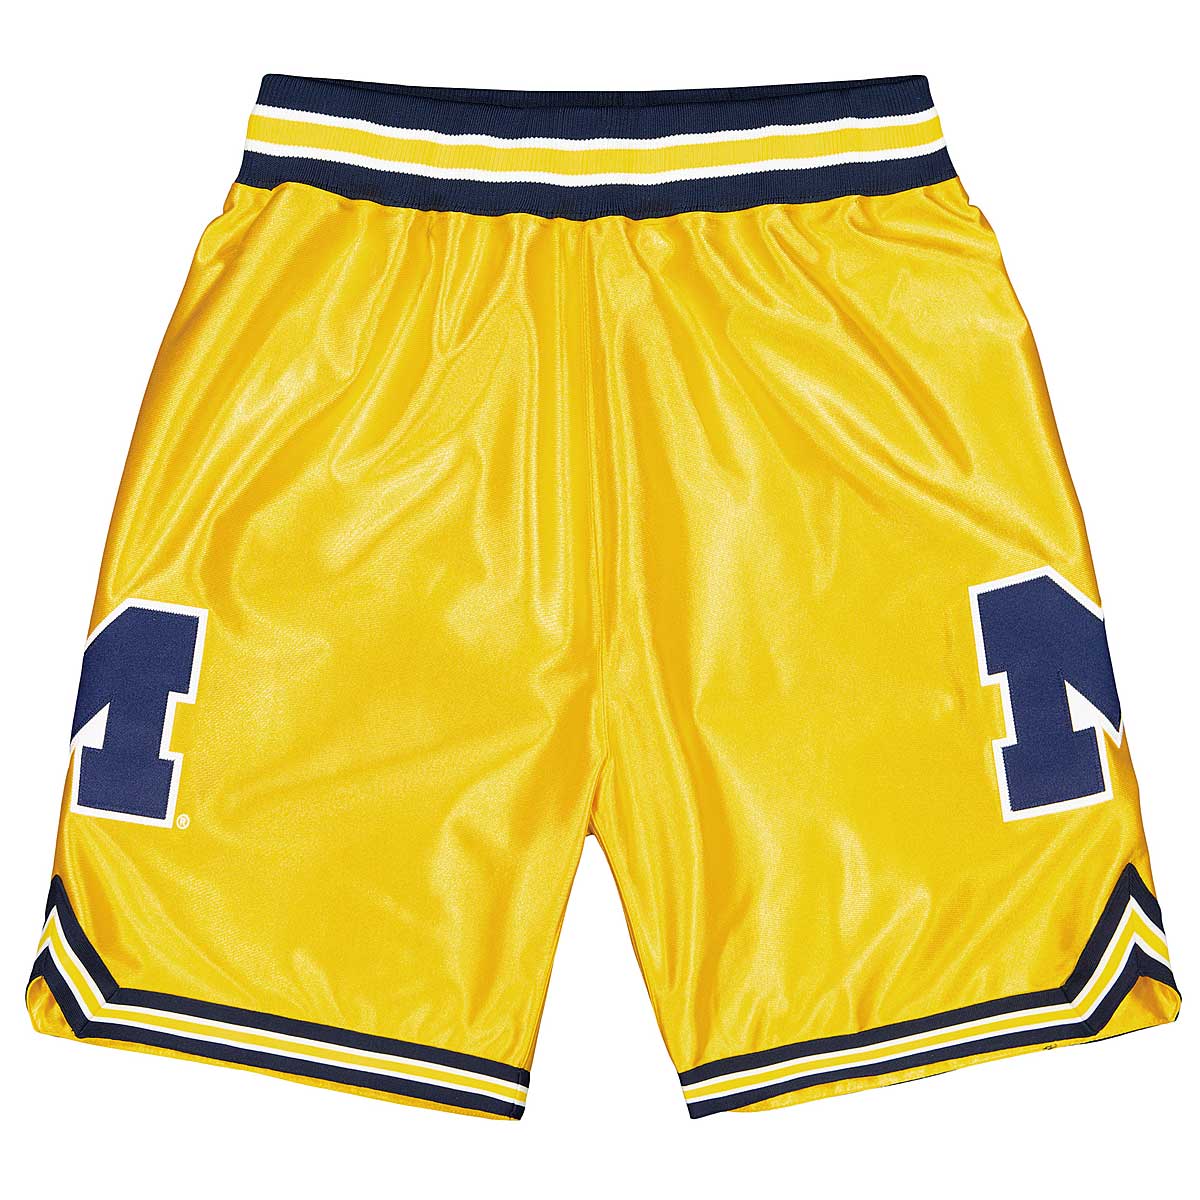 Buy NCAA MICHIGAN WOLVERINES 1991 AUTHENTIC SHORTS for N/A 0.0 on 